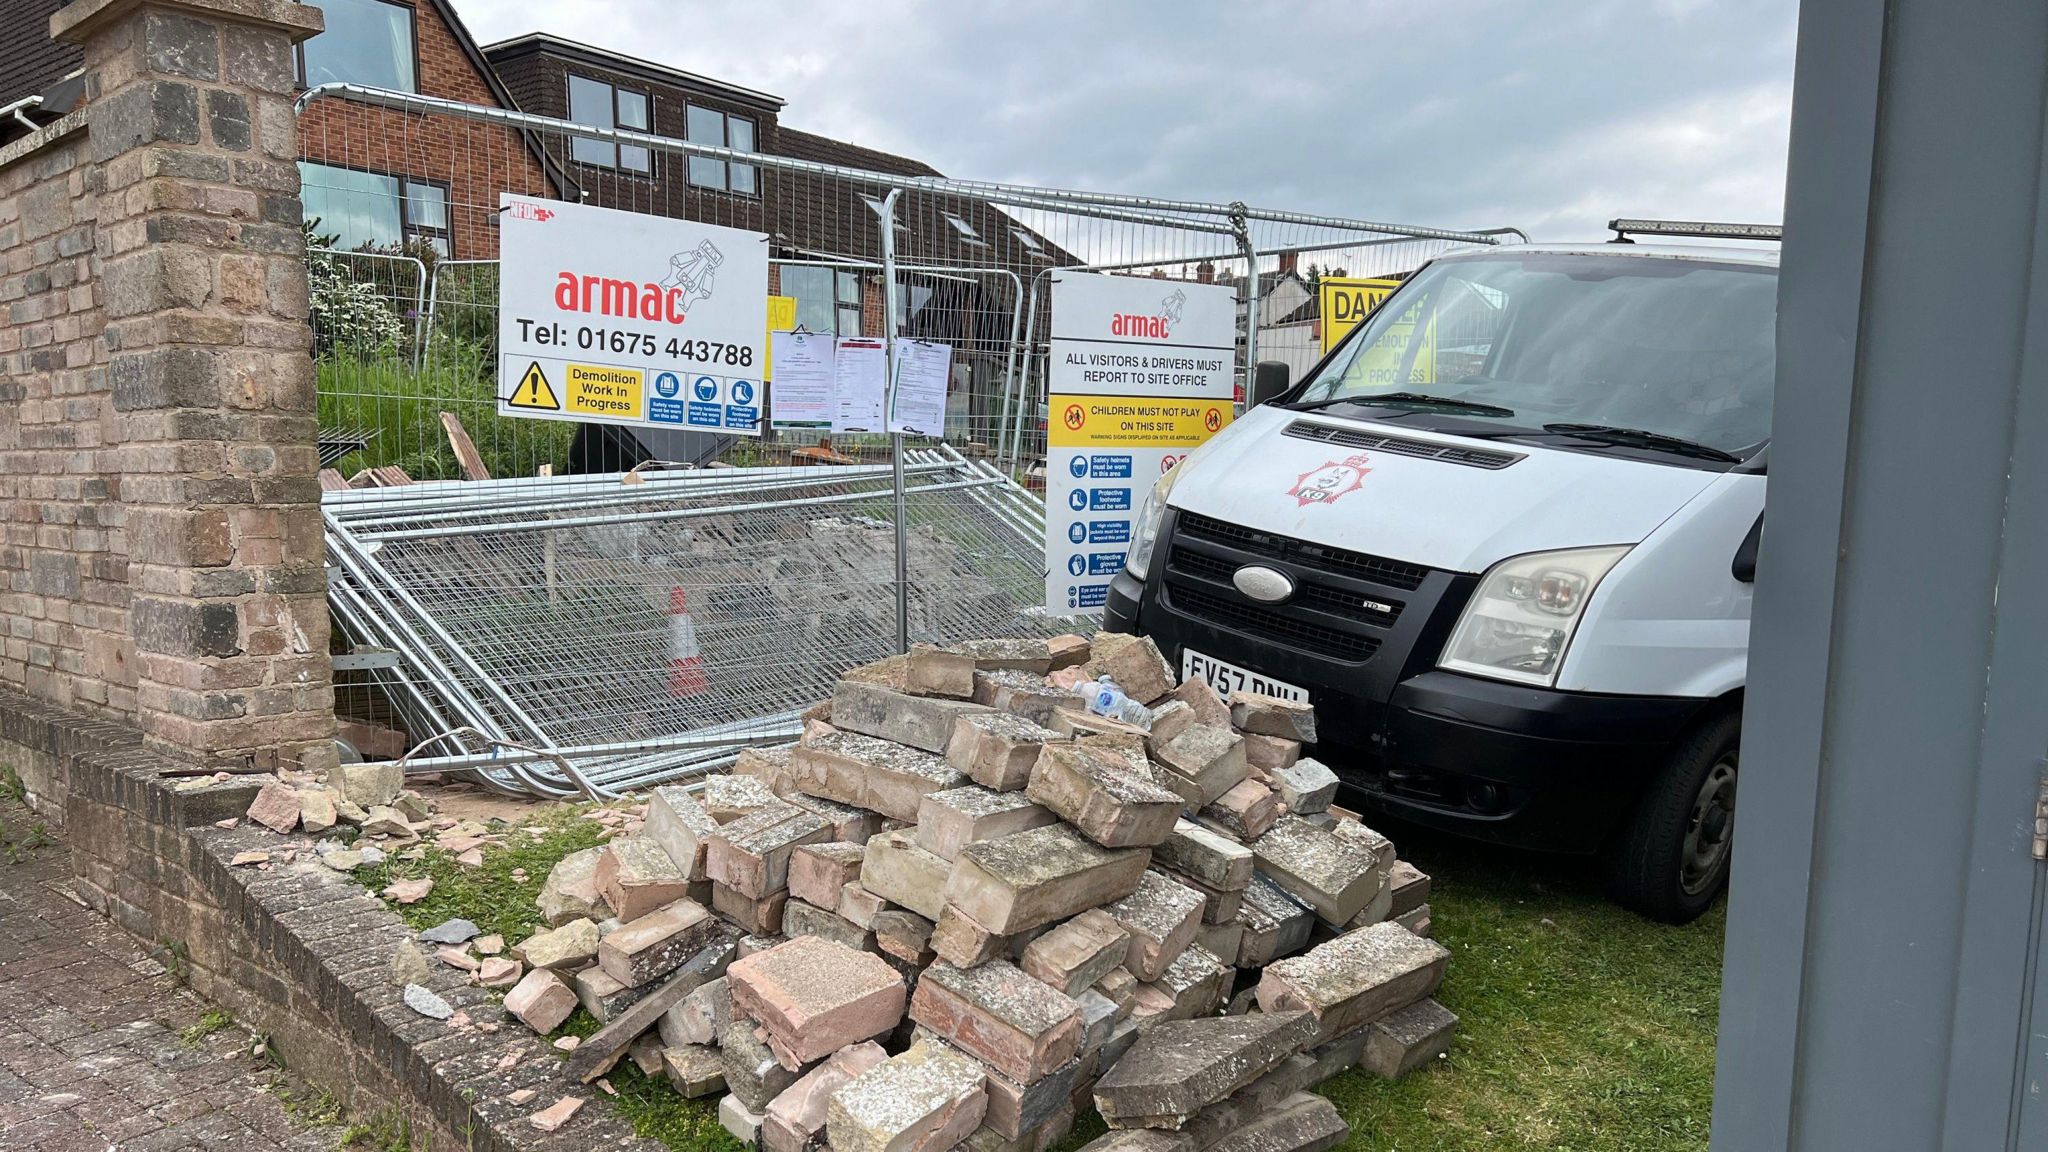 Picture shows a white van outside a house, which is behind large silver fencing. A pile of bricks from the demolished building is visible in the foreground. 